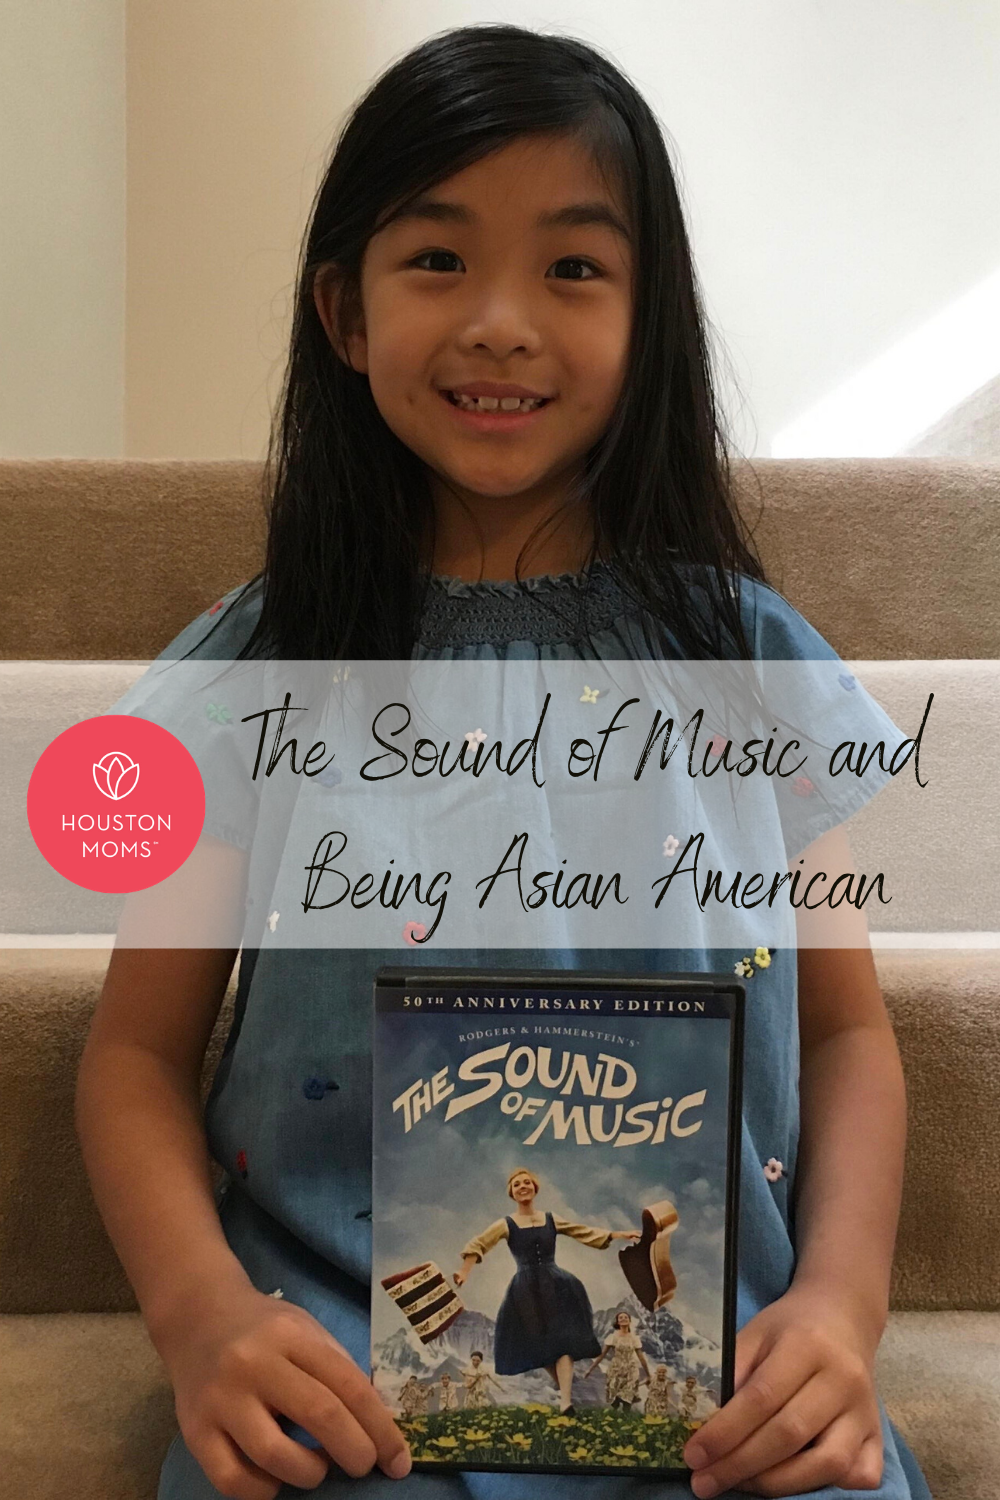 Houston Moms "The Sound of Music and Being Asian American" #houstonmoms #houstonmomsblog #momsaroundhouston